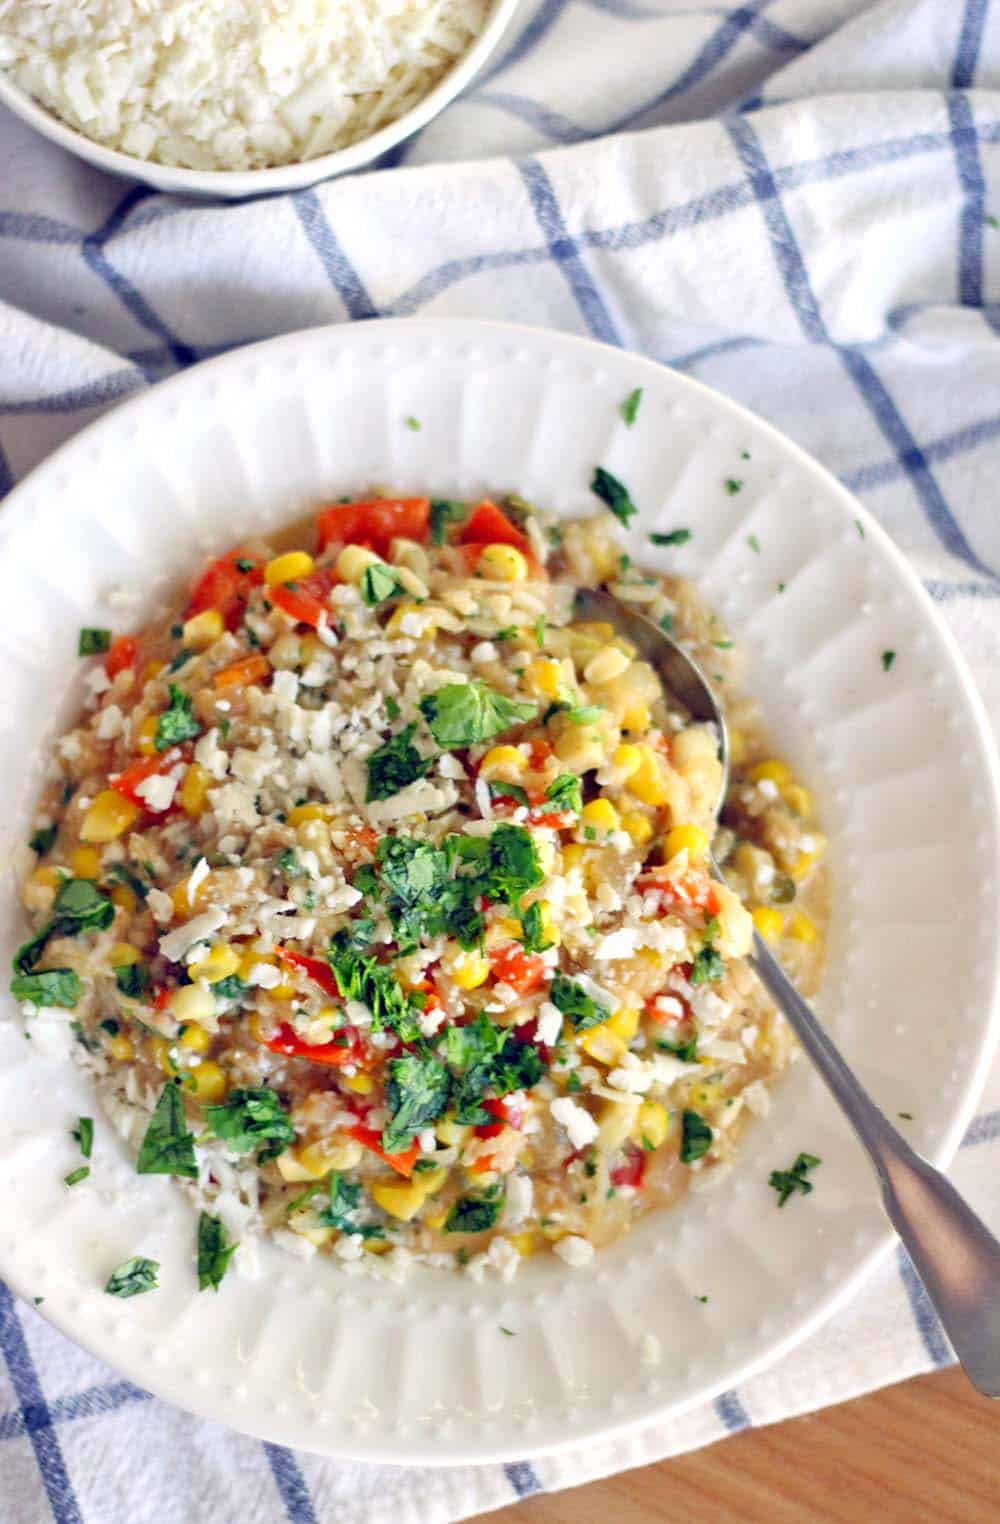 This easy brown rice risotto has a Mexican twist with red bell and jalapeno peppers, sweet fresh corn, and cotija cheese melted into every bite. Delicious as a side or as a main course!